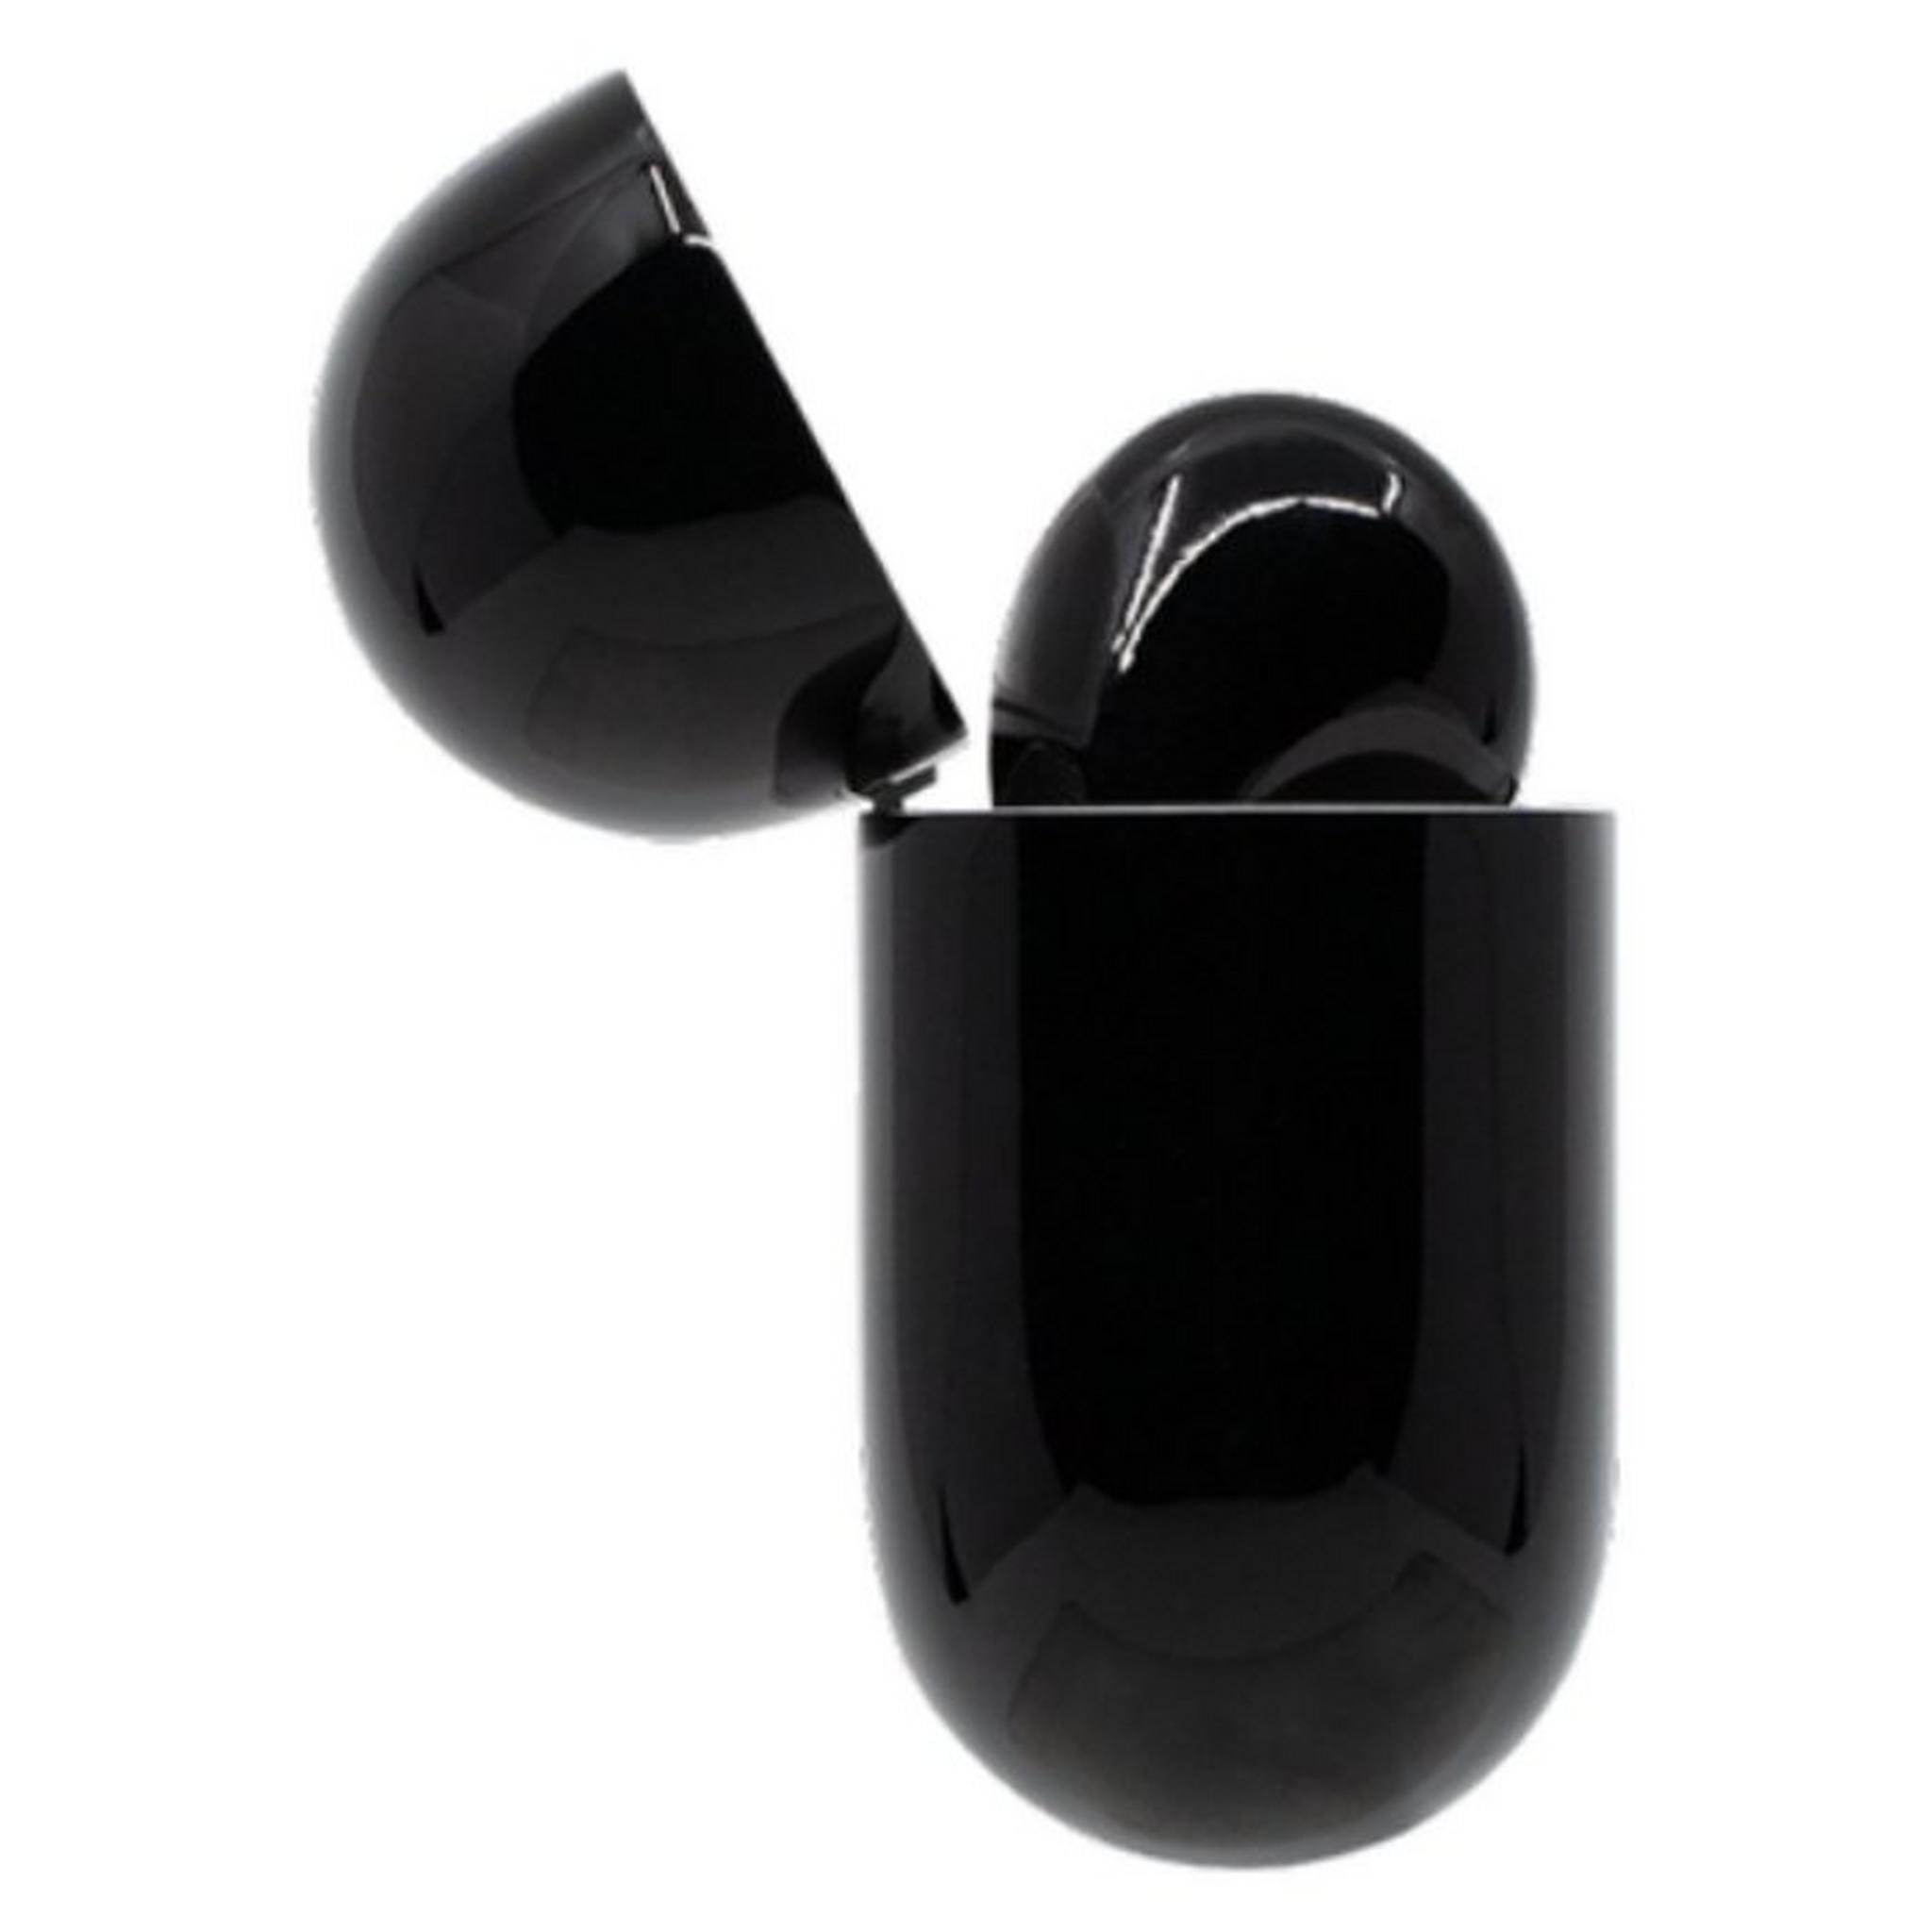 Switch Paint Airpods Pro MagSafe - Jet Black Gloss